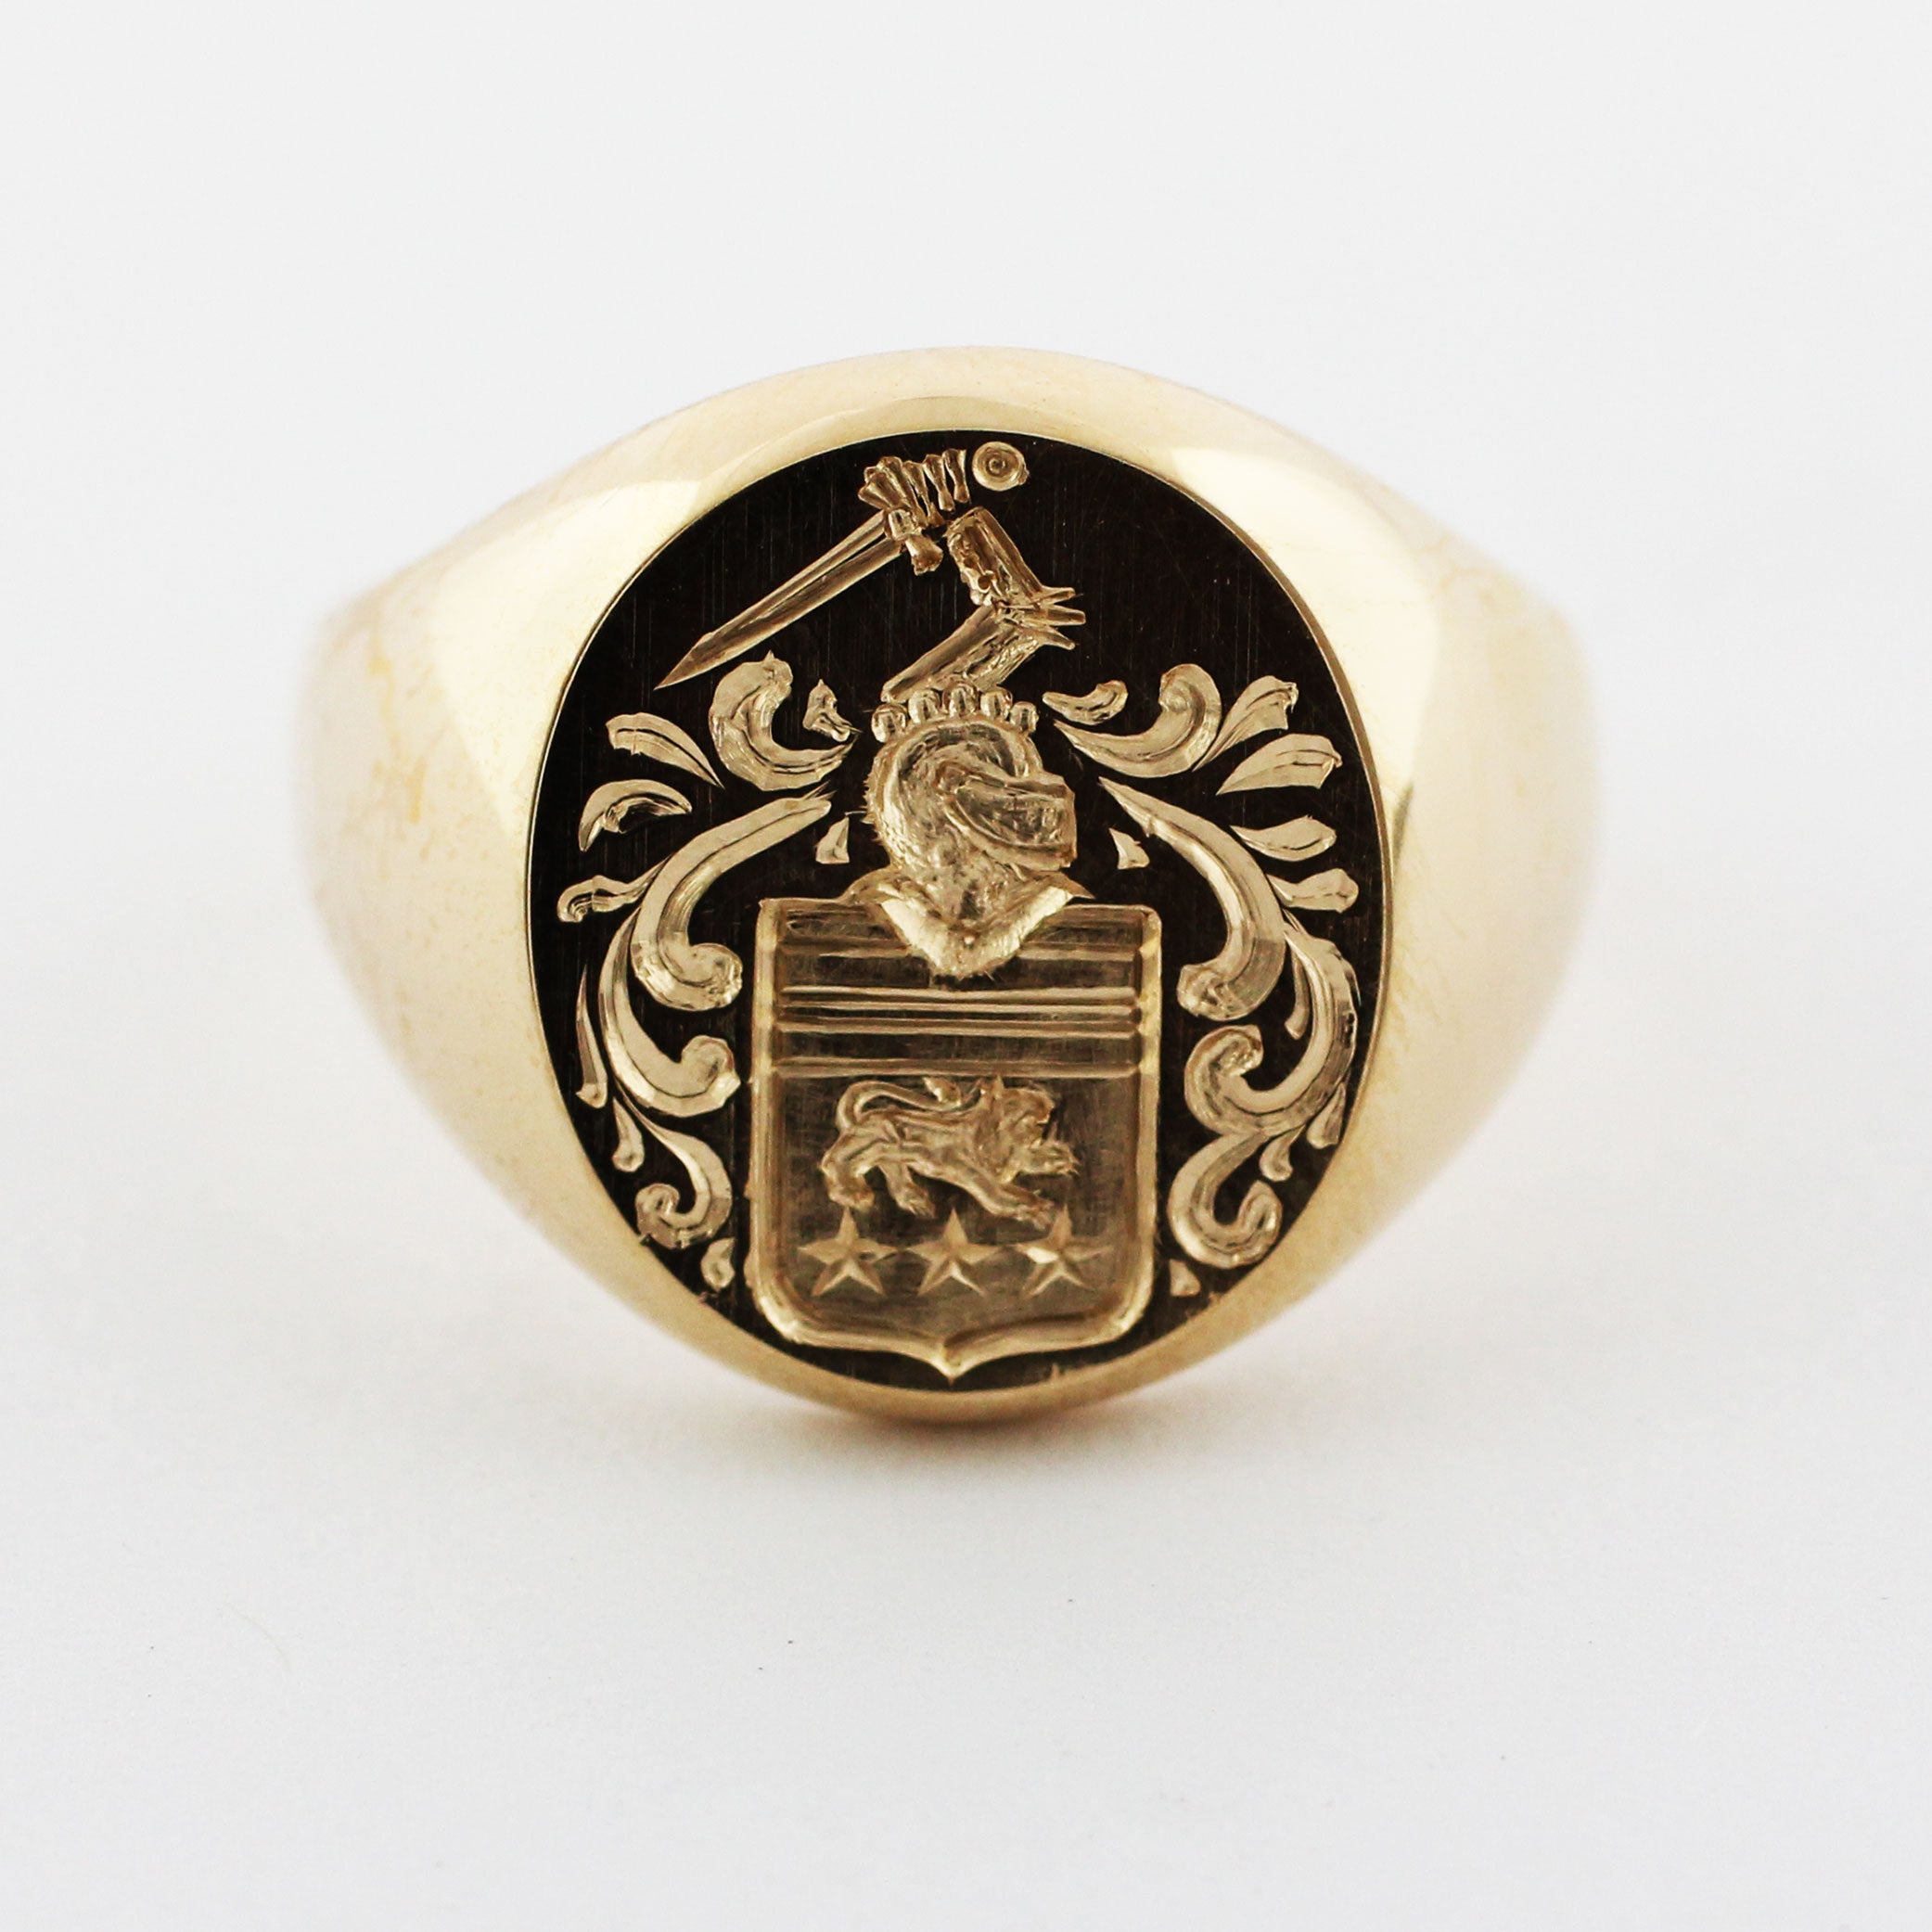 Custom 14-karat yellow gold signet ring proudly displays a meticulously crafted intaglio family crest.